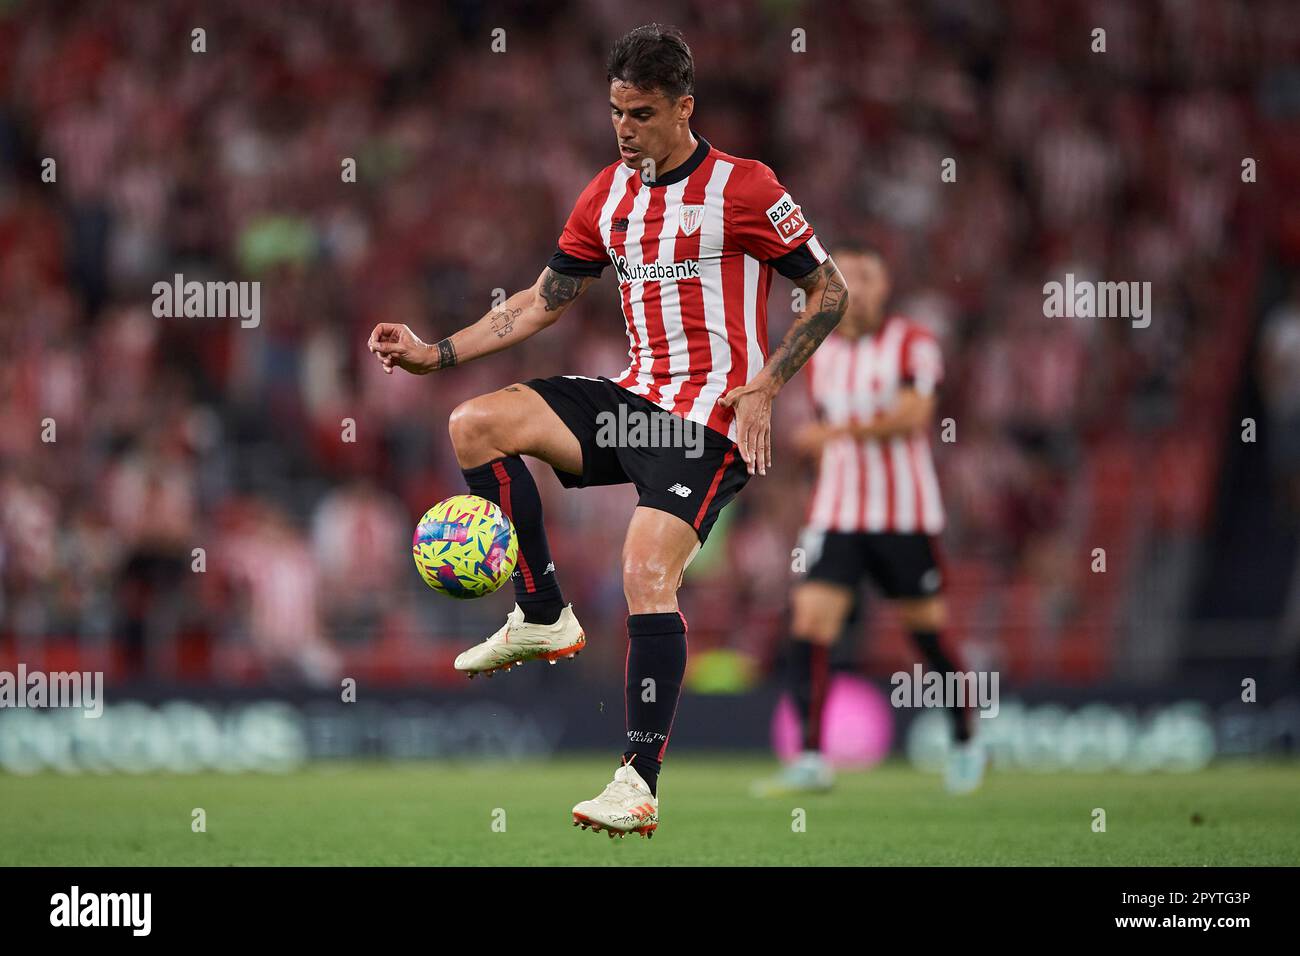 Bilbao, Spain. May 4, 2023, Dani Garcia of Athletic Club during the La Liga match between Athletic Club and Real Betis played at San Mames Stadium on May 4, 2023 in Bilbao, Spain. (Photo by Cesar Ortiz / PRESSIN) Stock Photo